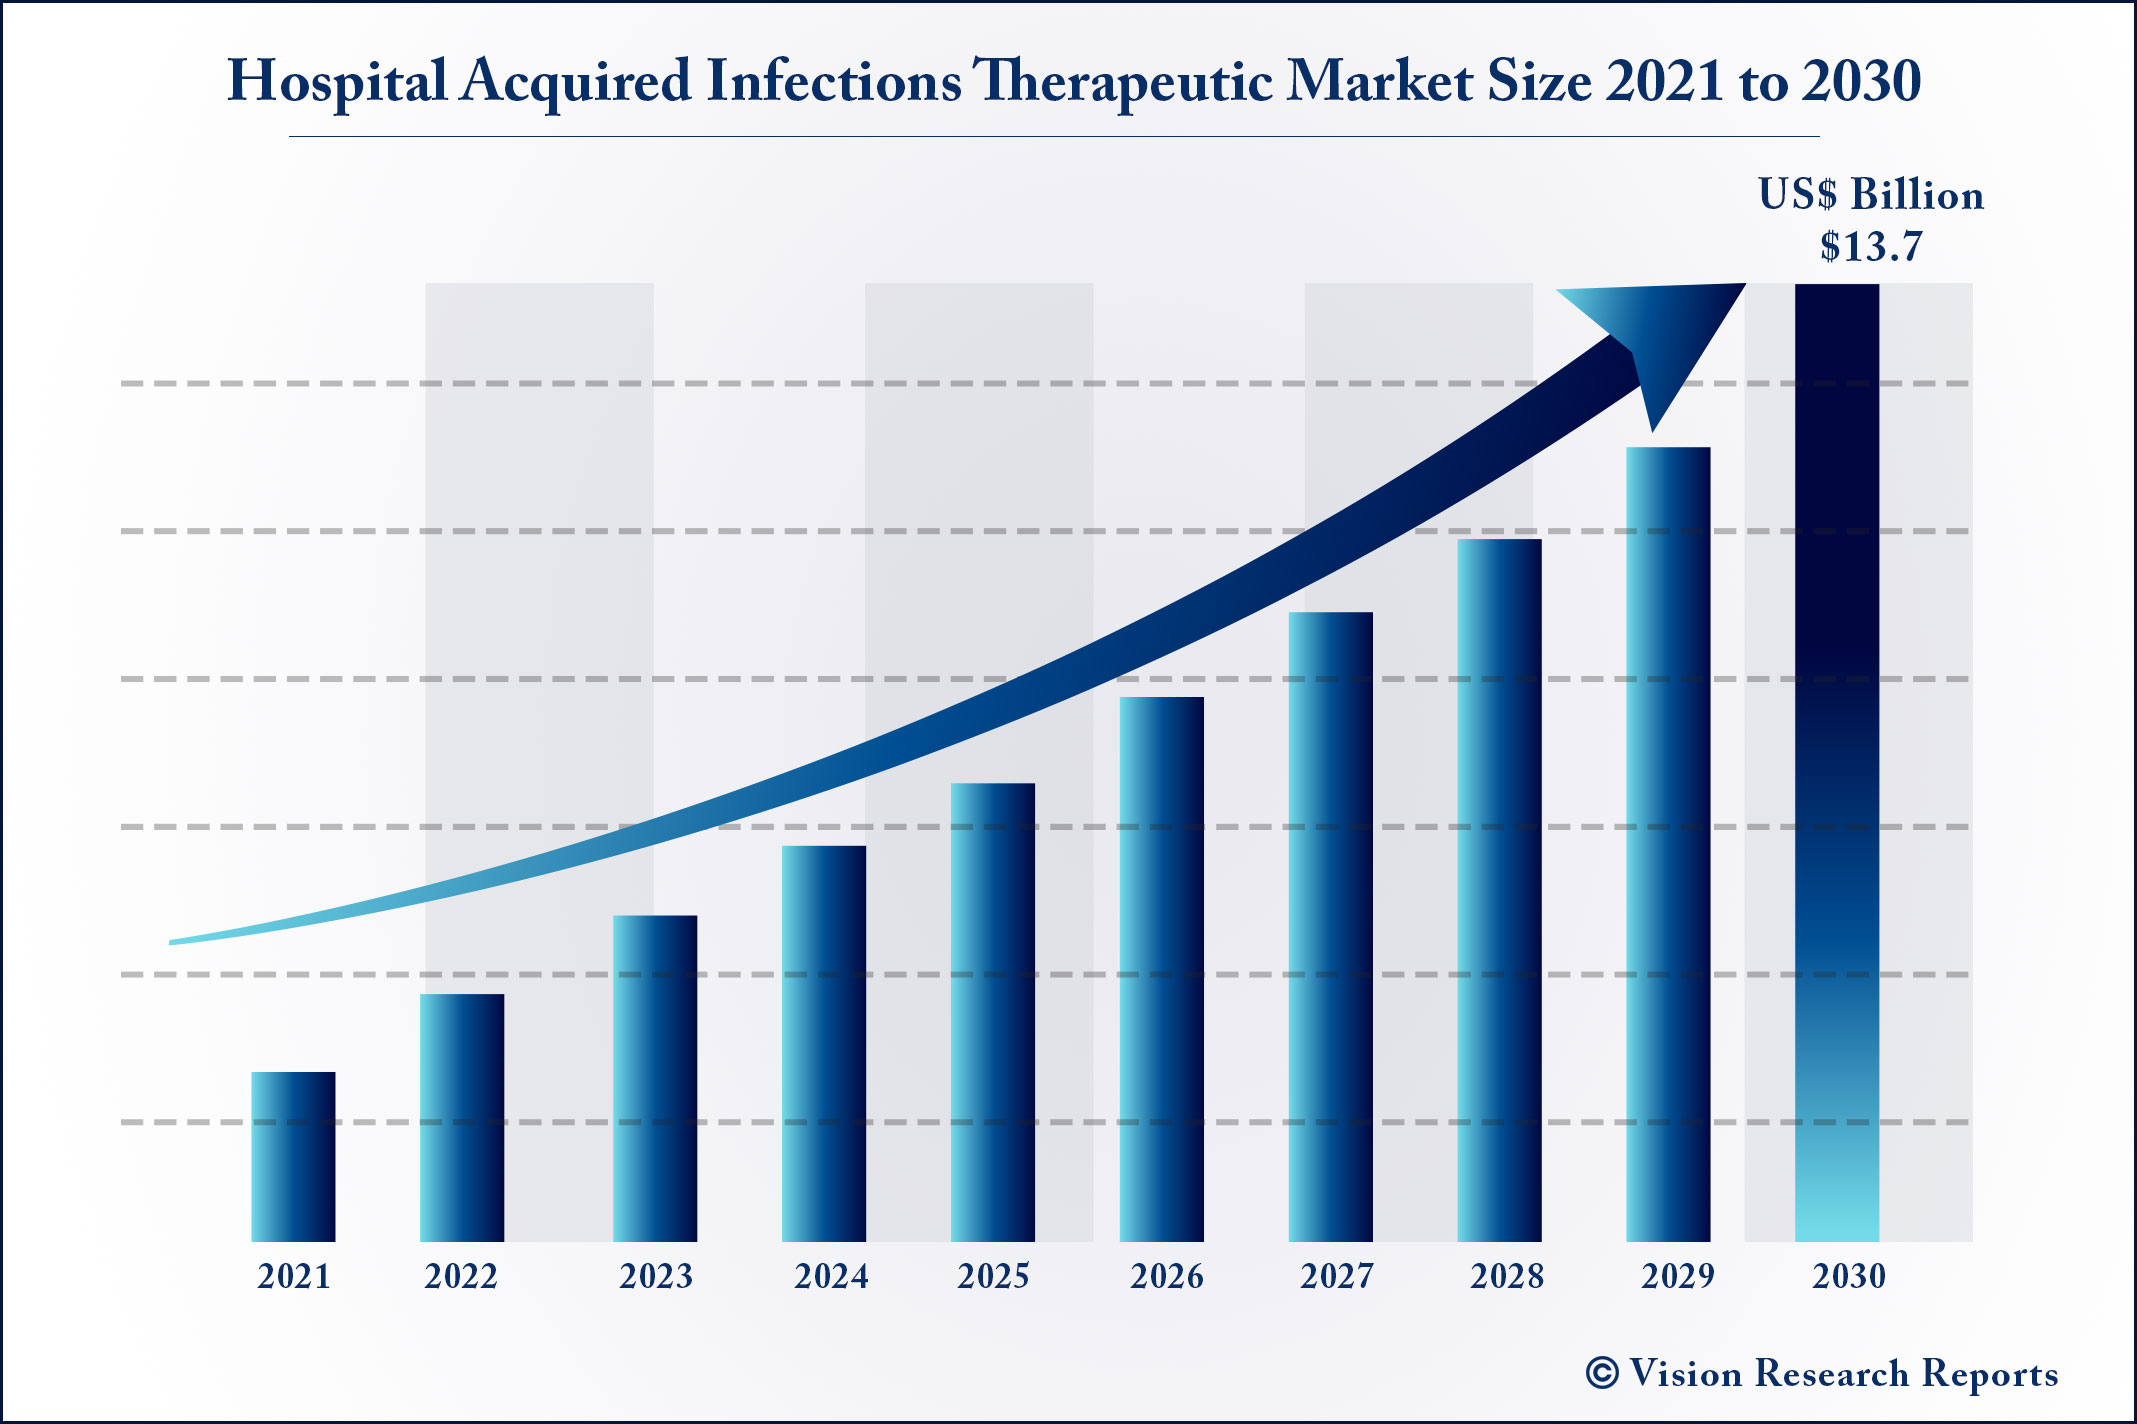 Hospital Acquired Infections Therapeutic Market Size 2021 to 2030